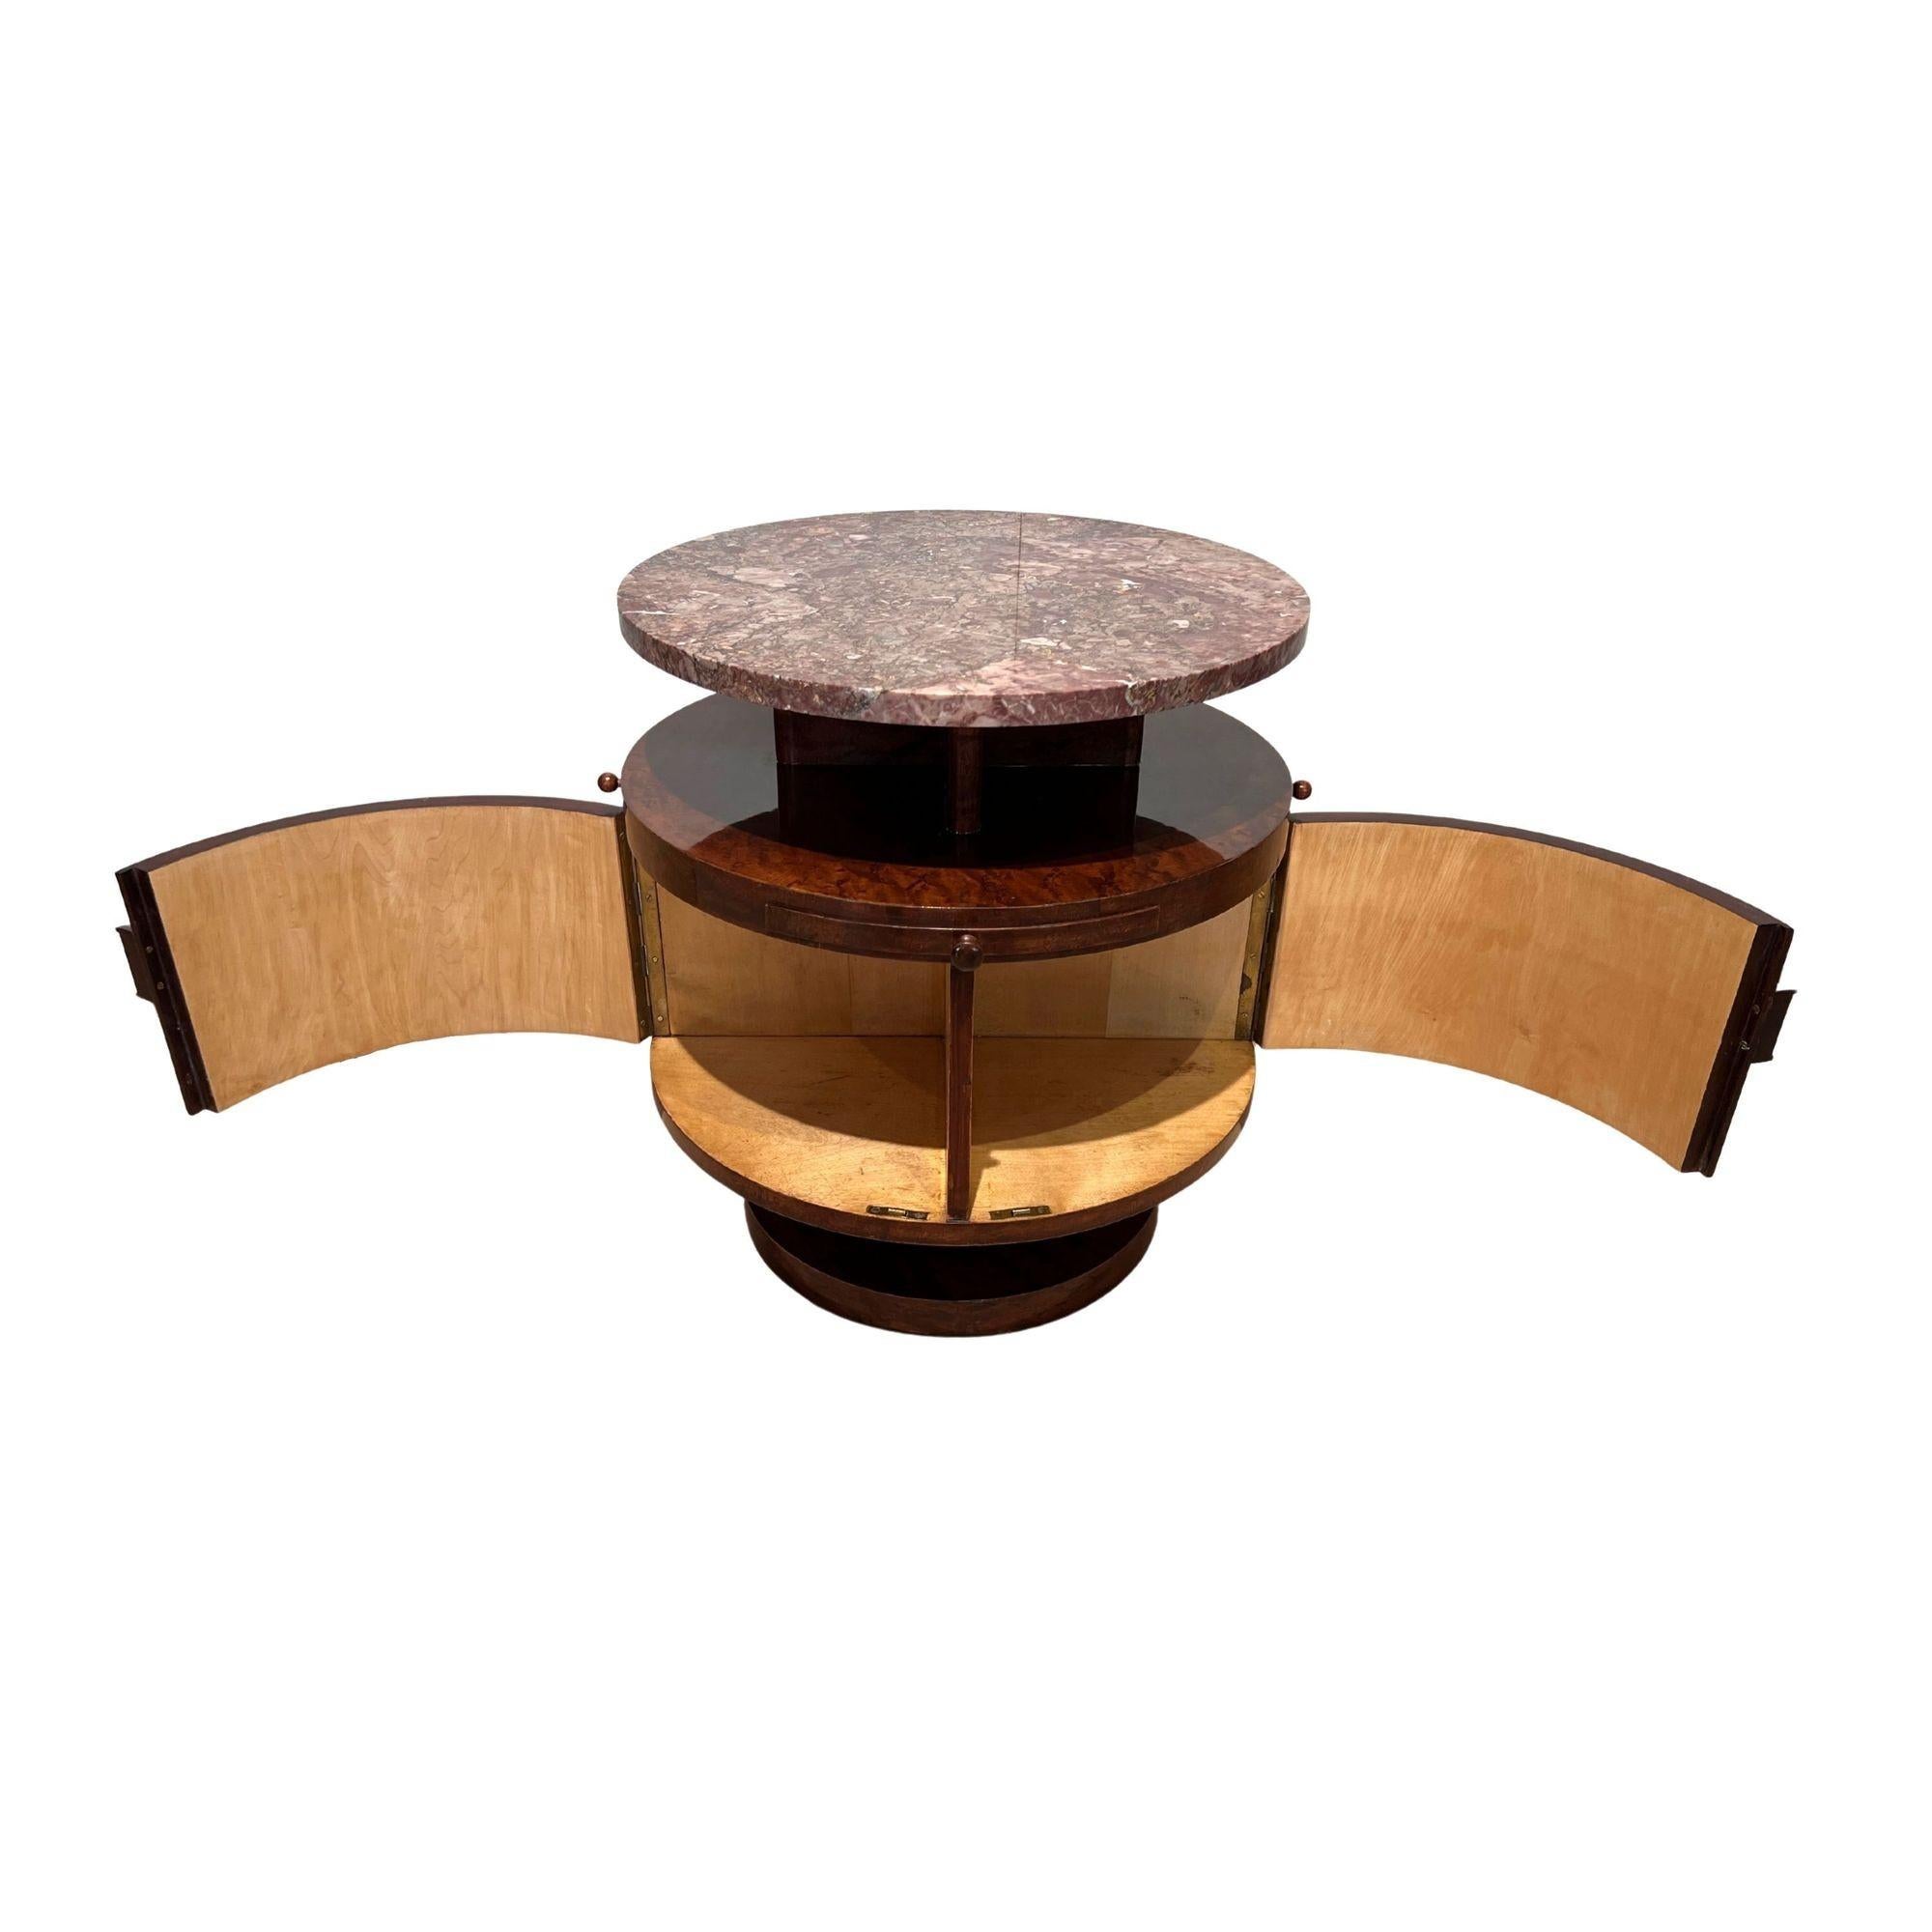 Polished Art Deco Revolving Drum Table, Birds Eye Maple, Marble, France, circa 1930 For Sale